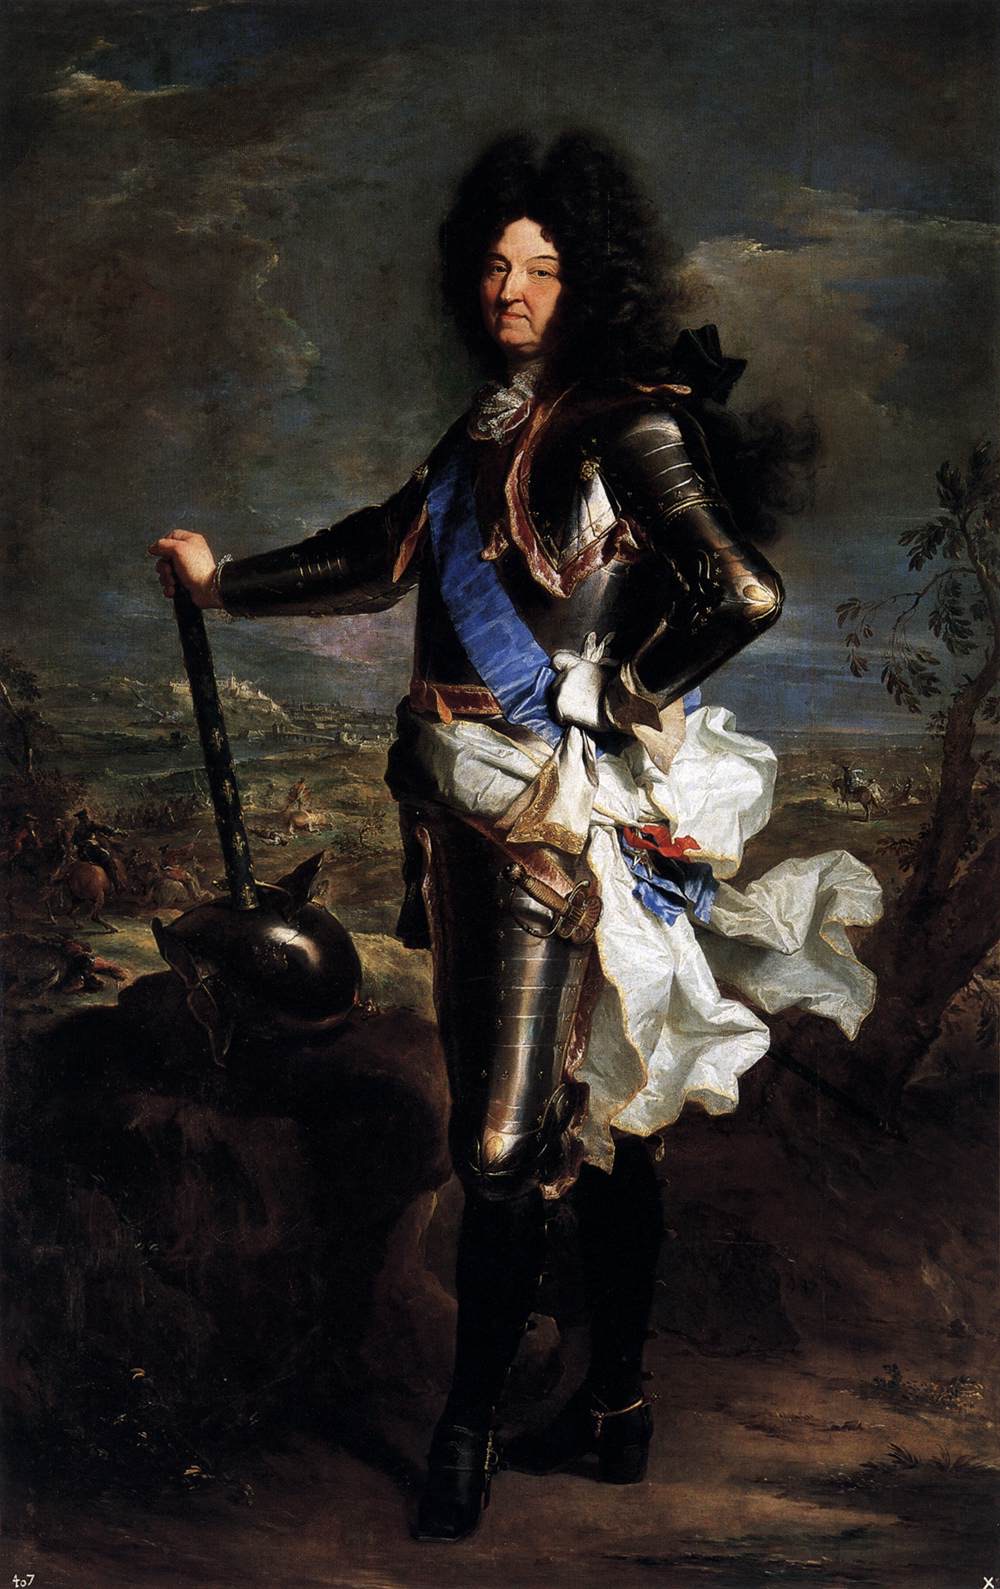 September 1, 1715: Death of King Louis XIV of France and Navarre. | European Royal History